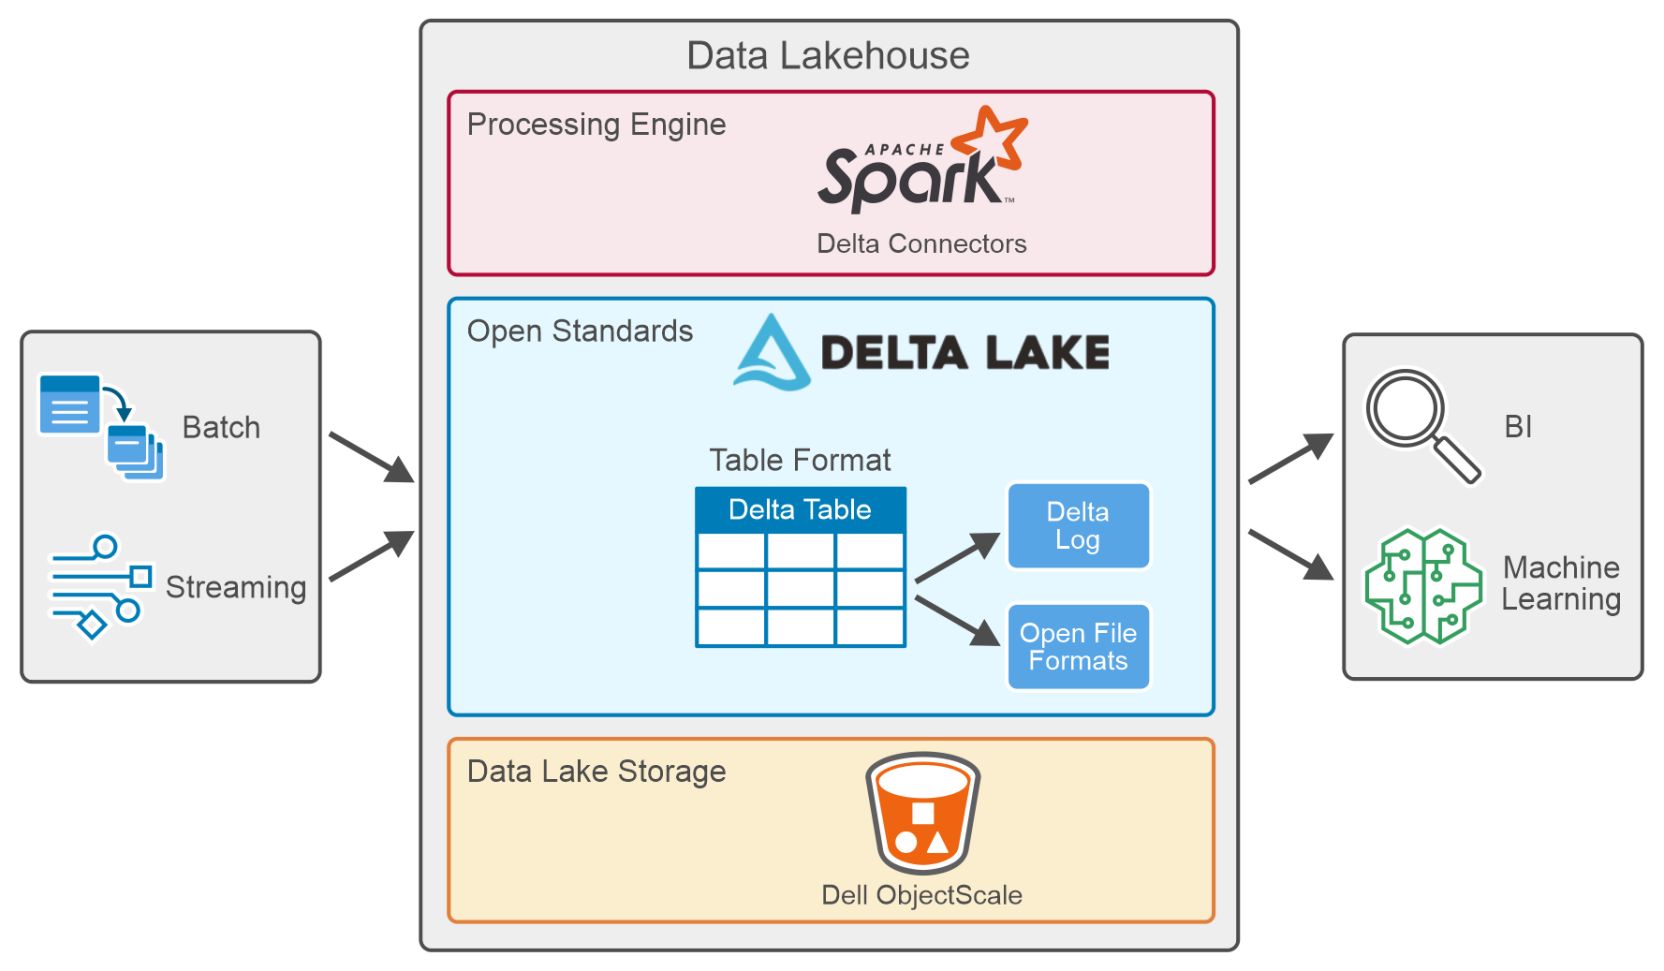 This figure shows how data is processed in Data Lakehouse